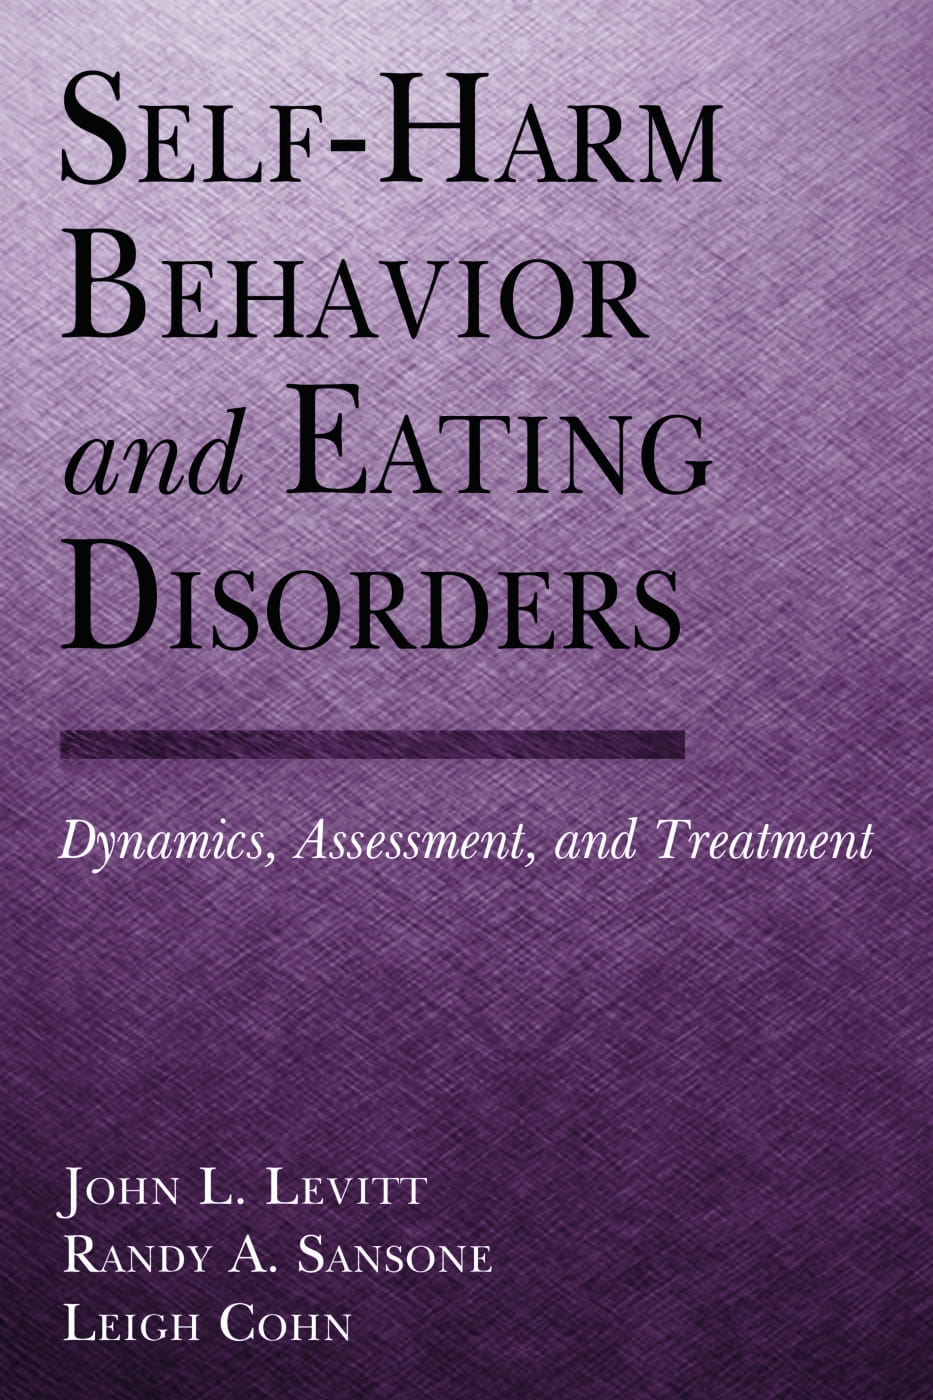 Self-Harm Behavior and Eating Disorders: Dynamics, Assessment and Treatment